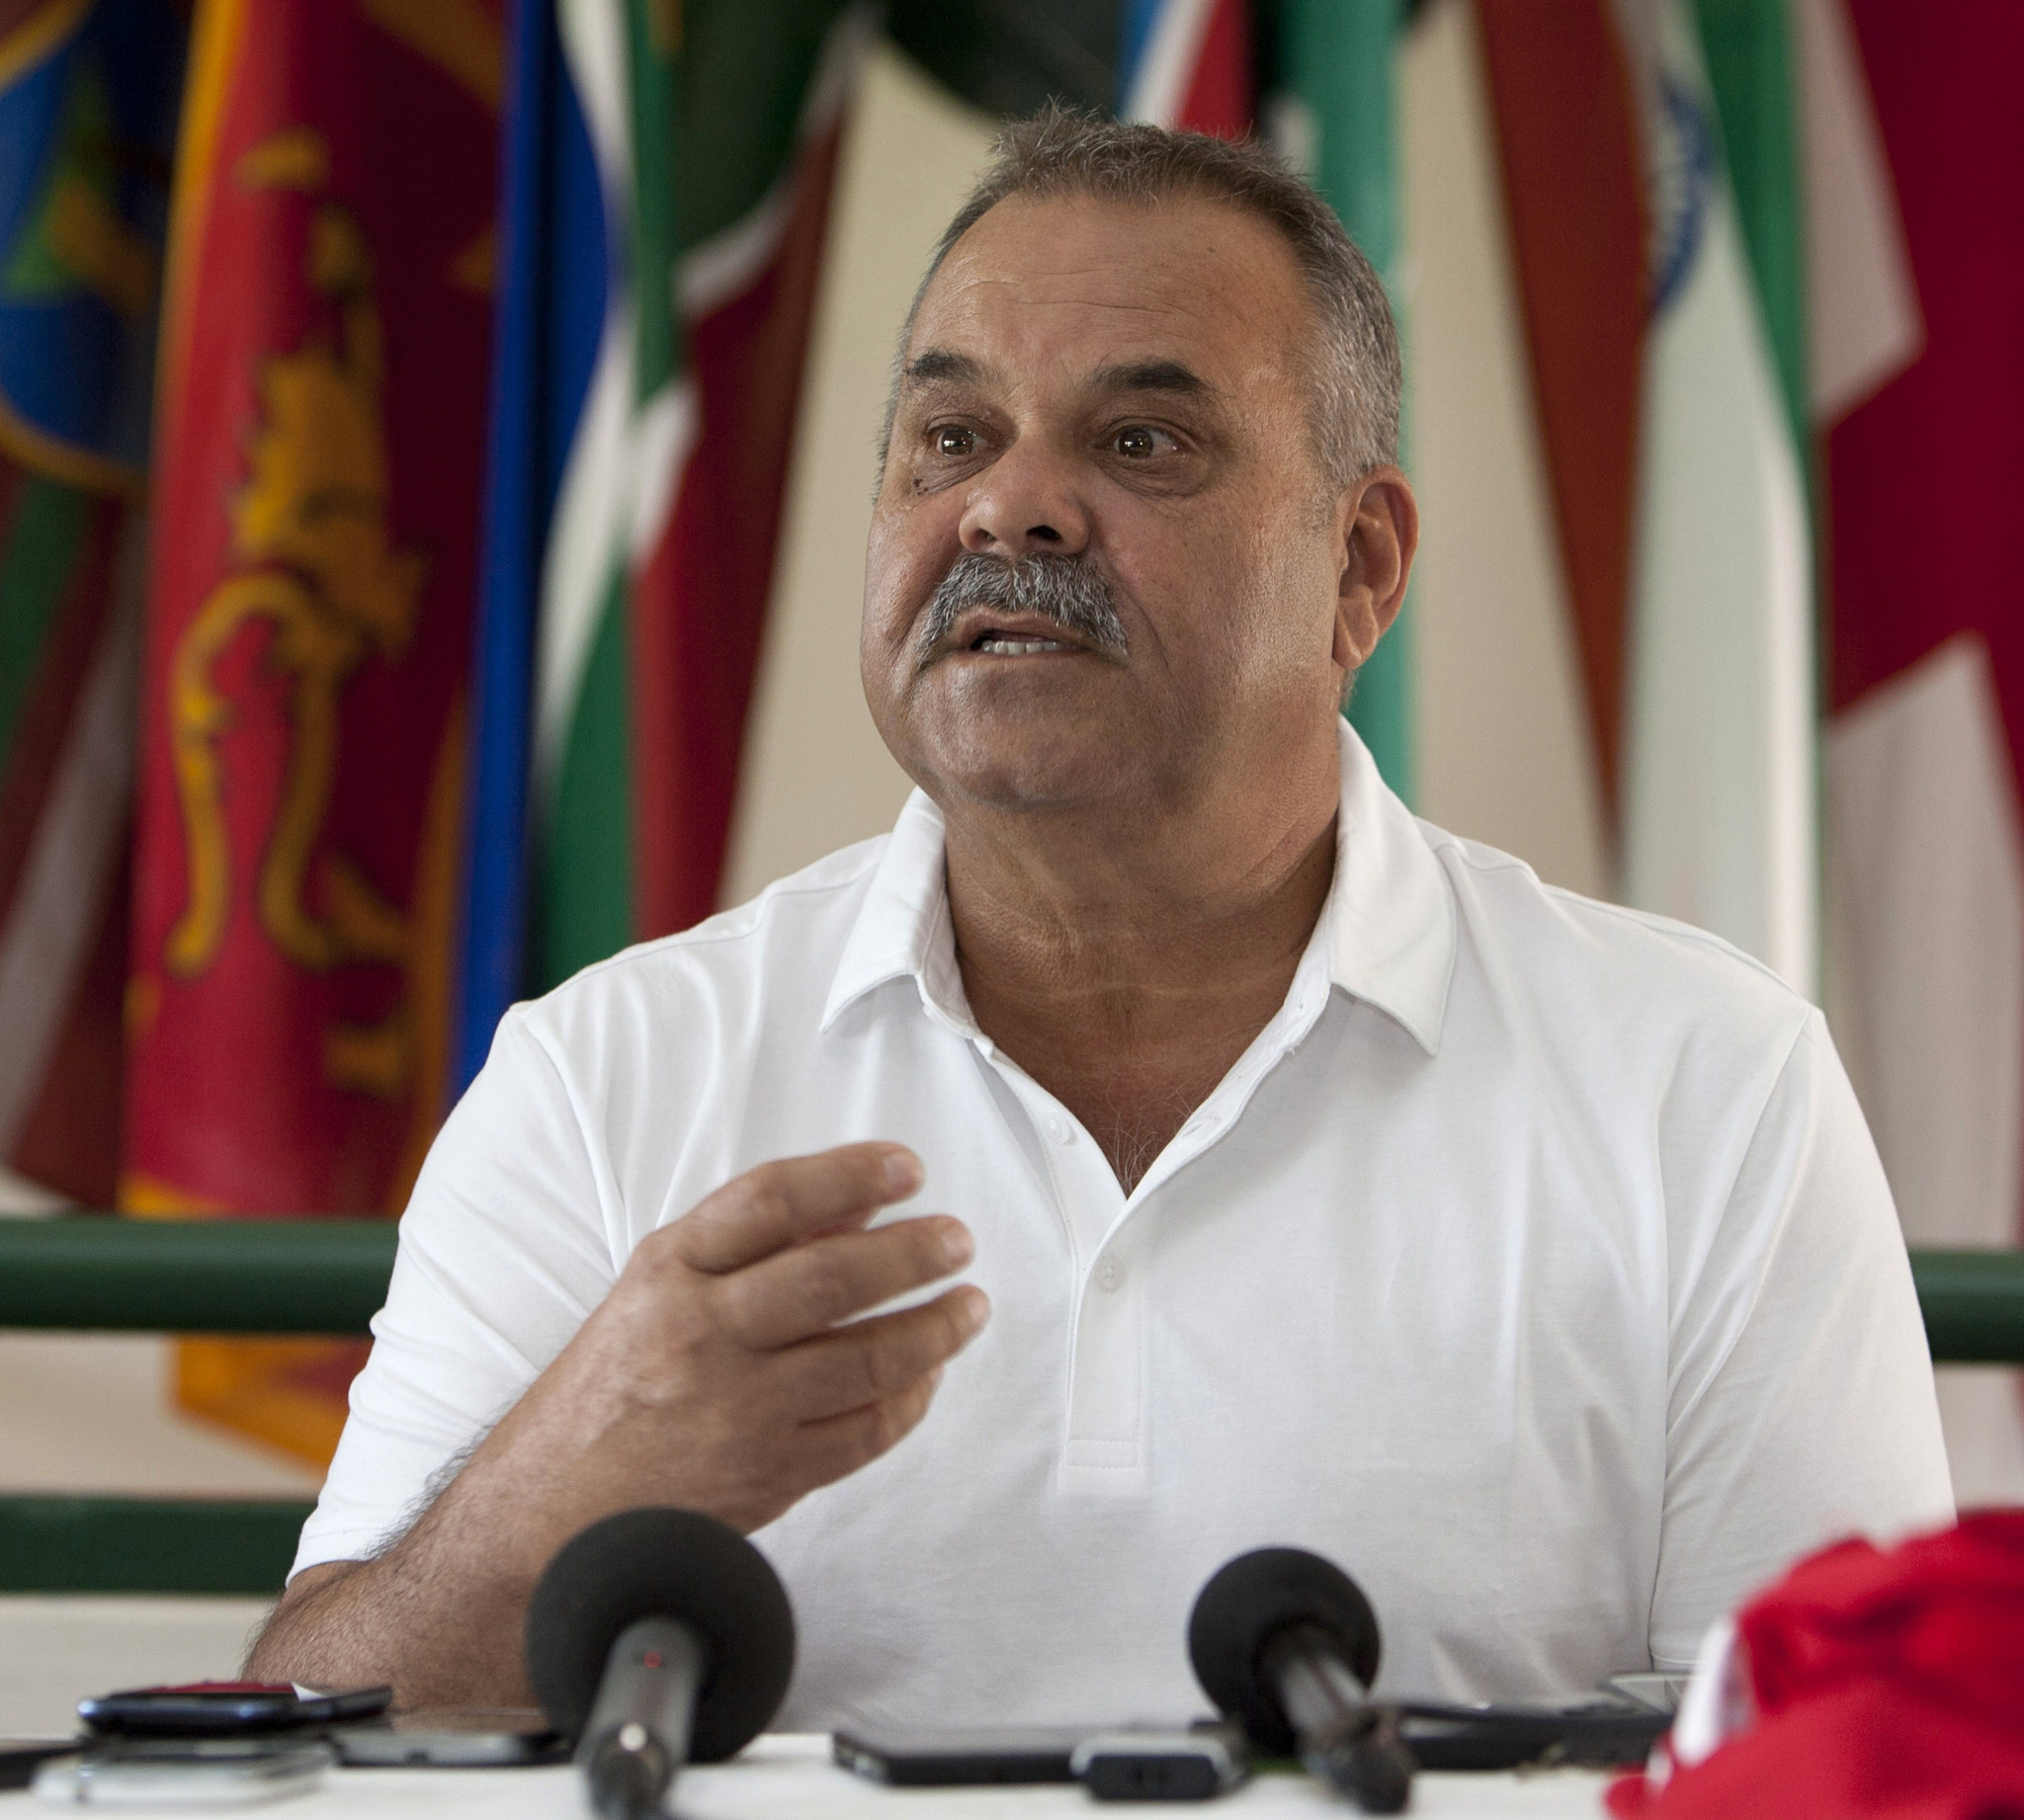 Dav Whatmore has been appointed as the new head coach of the Nepal men's cricket team ©Getty Images